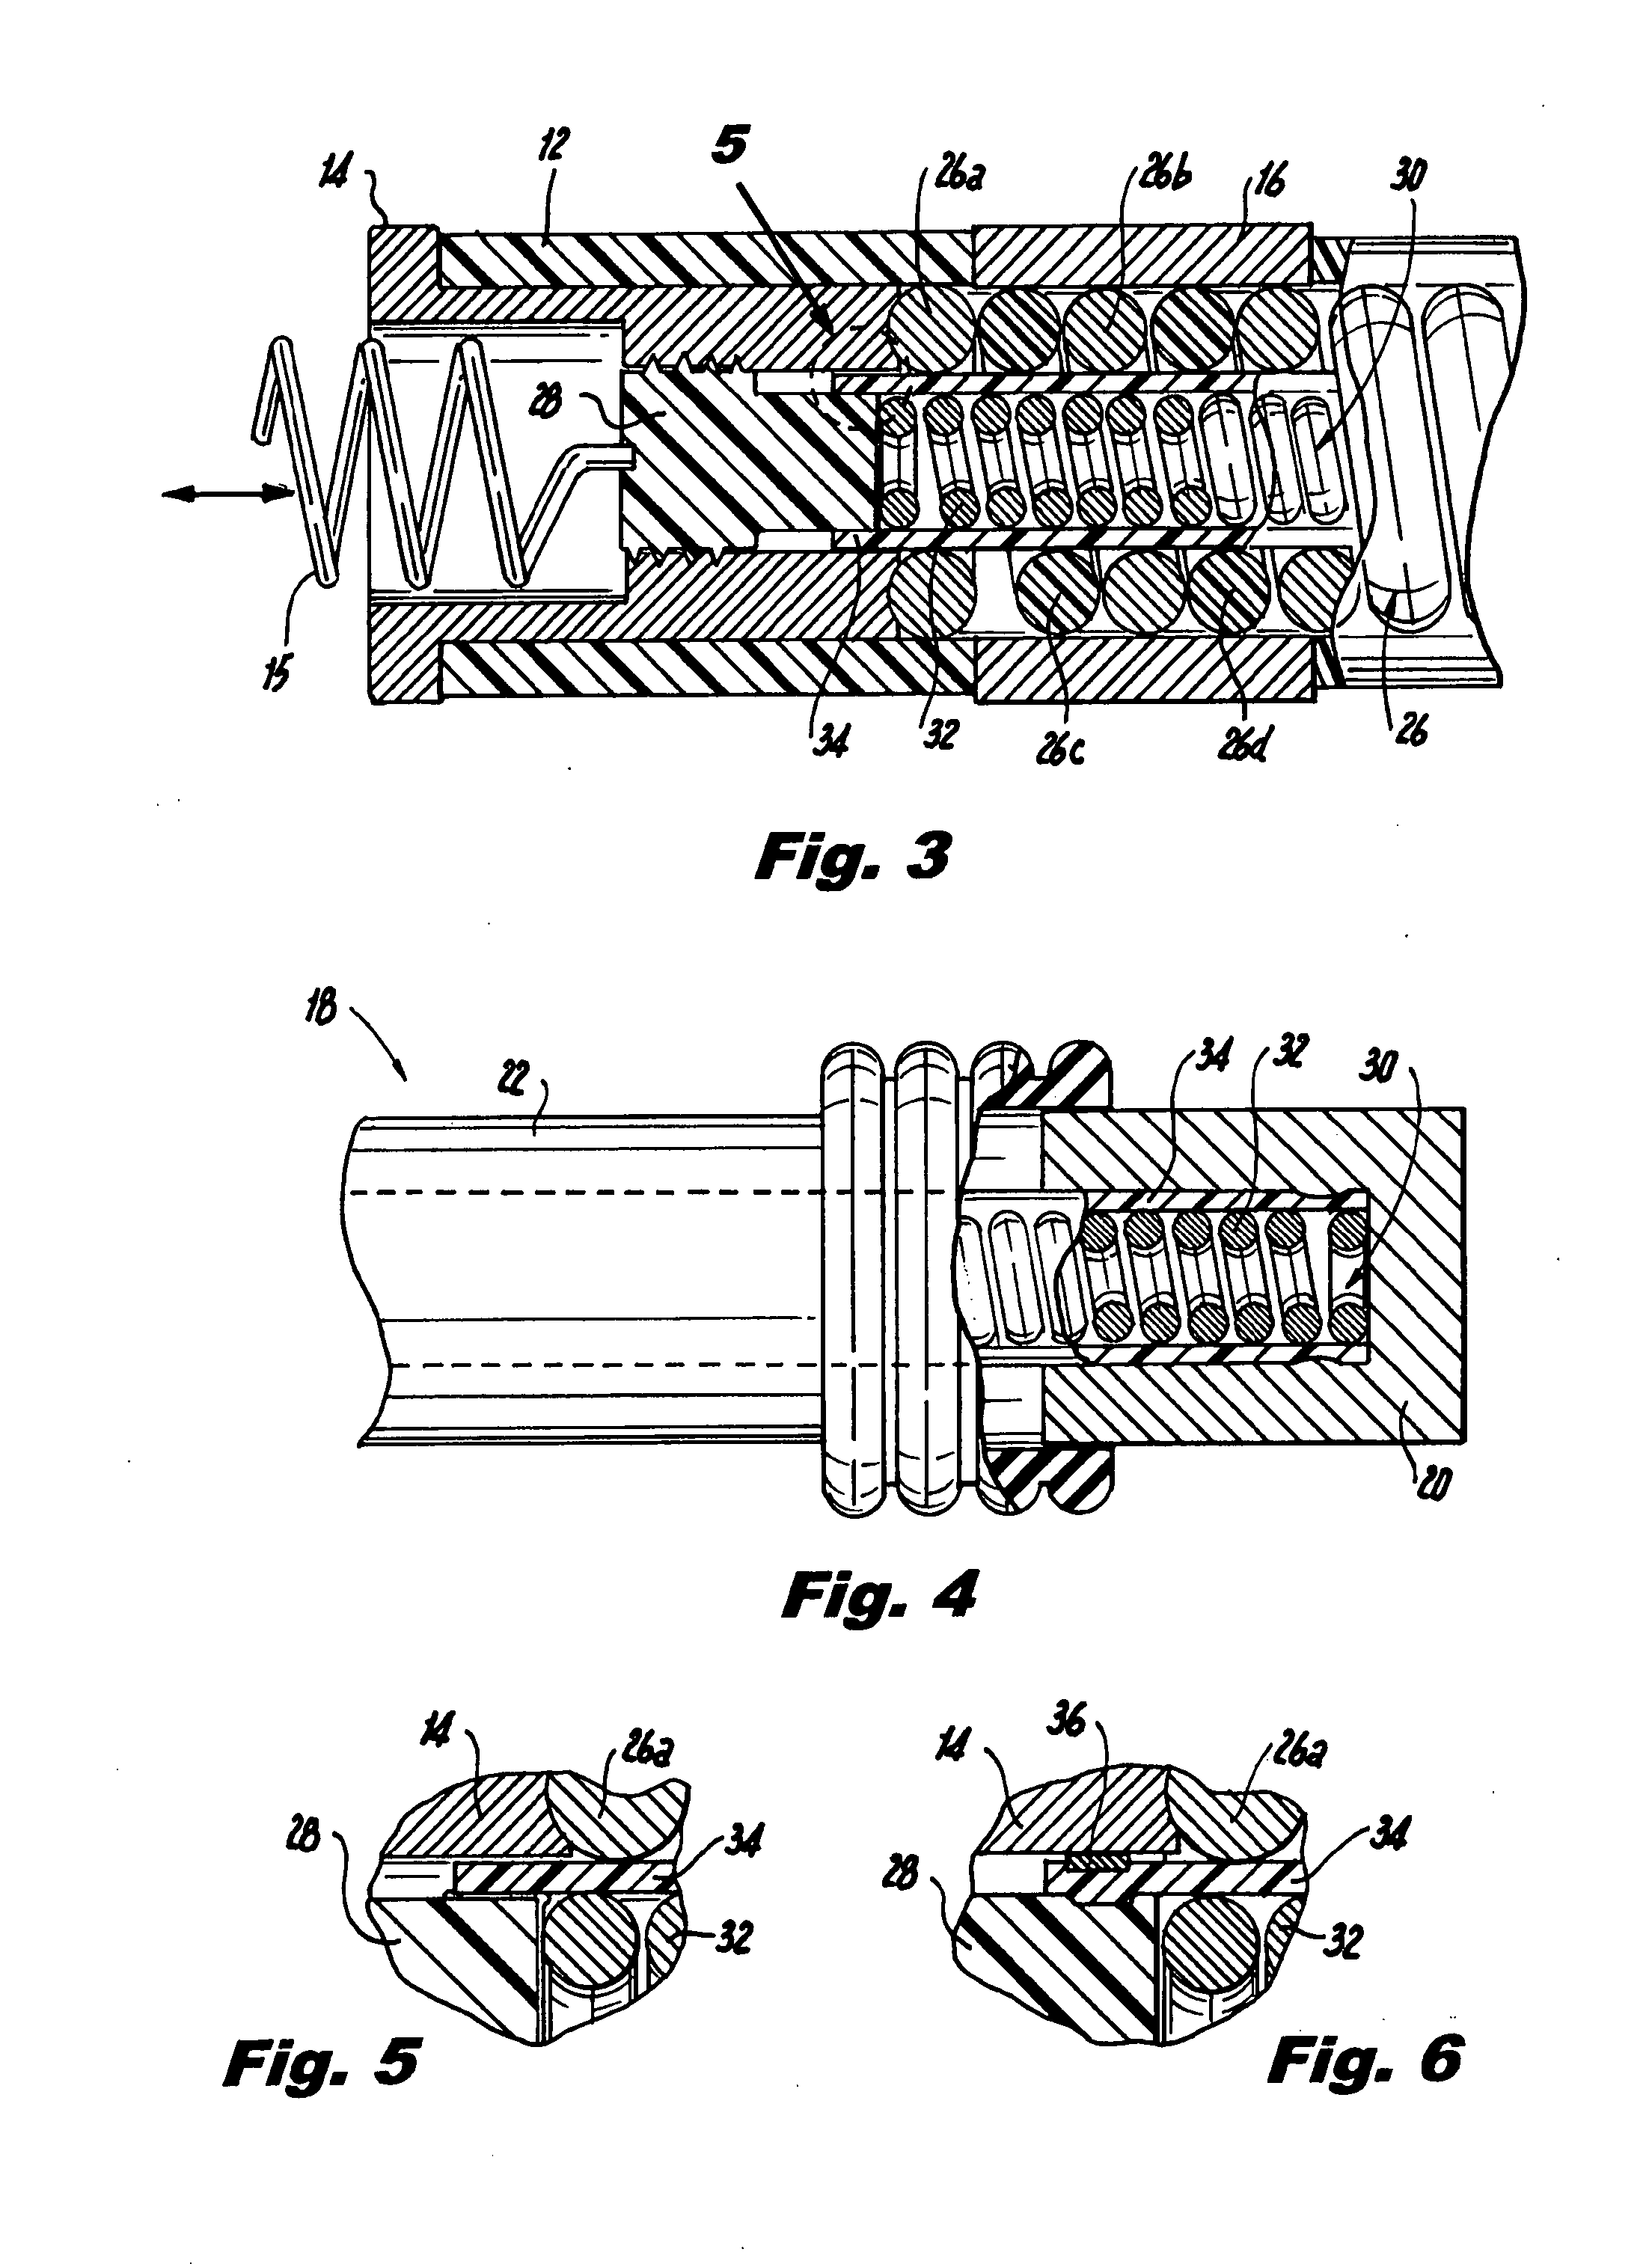 Low profile active fixation cardiac lead having torque transmitting means